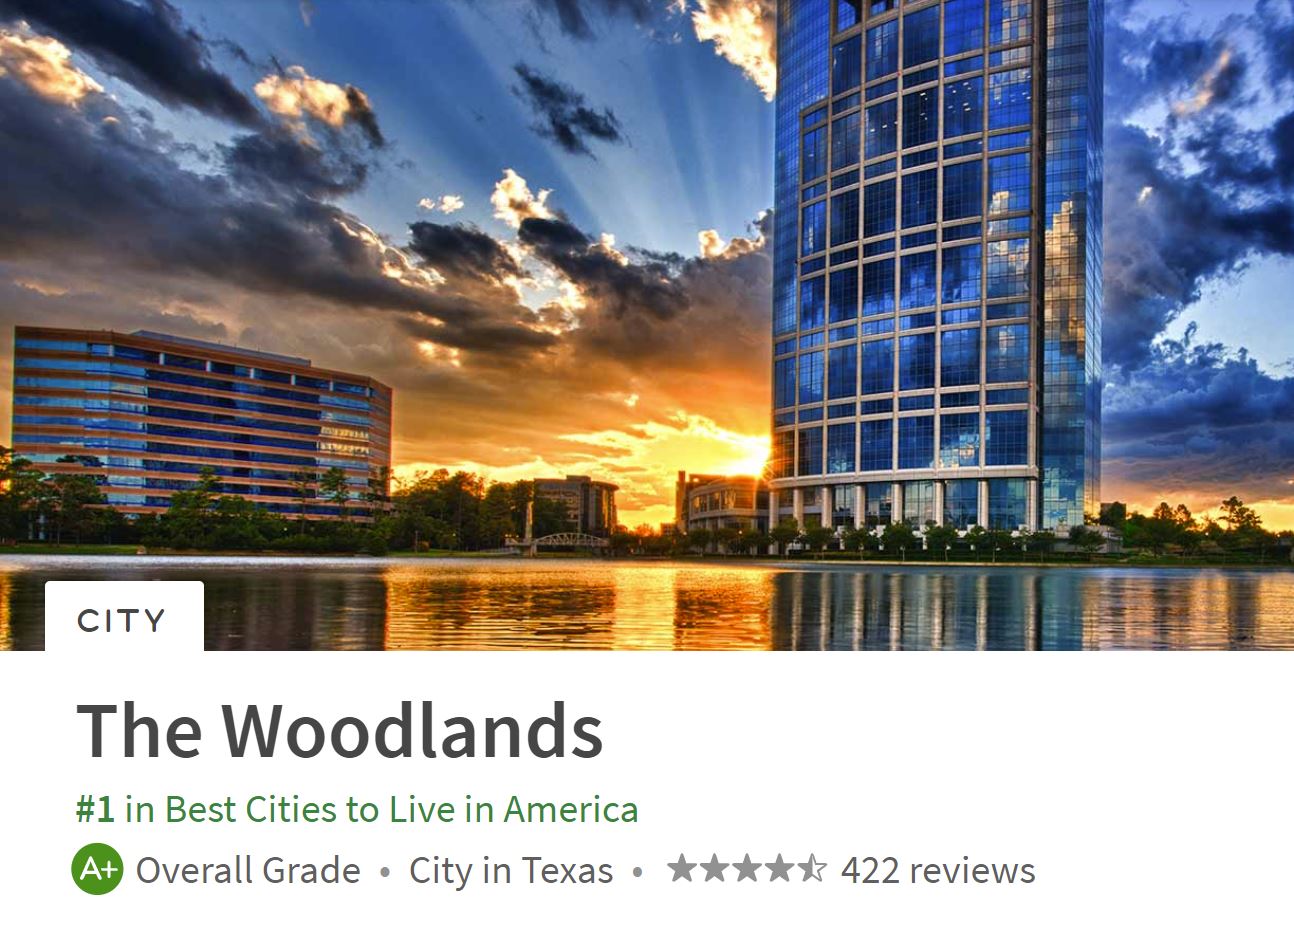 The Woodlands No. 1 City in America